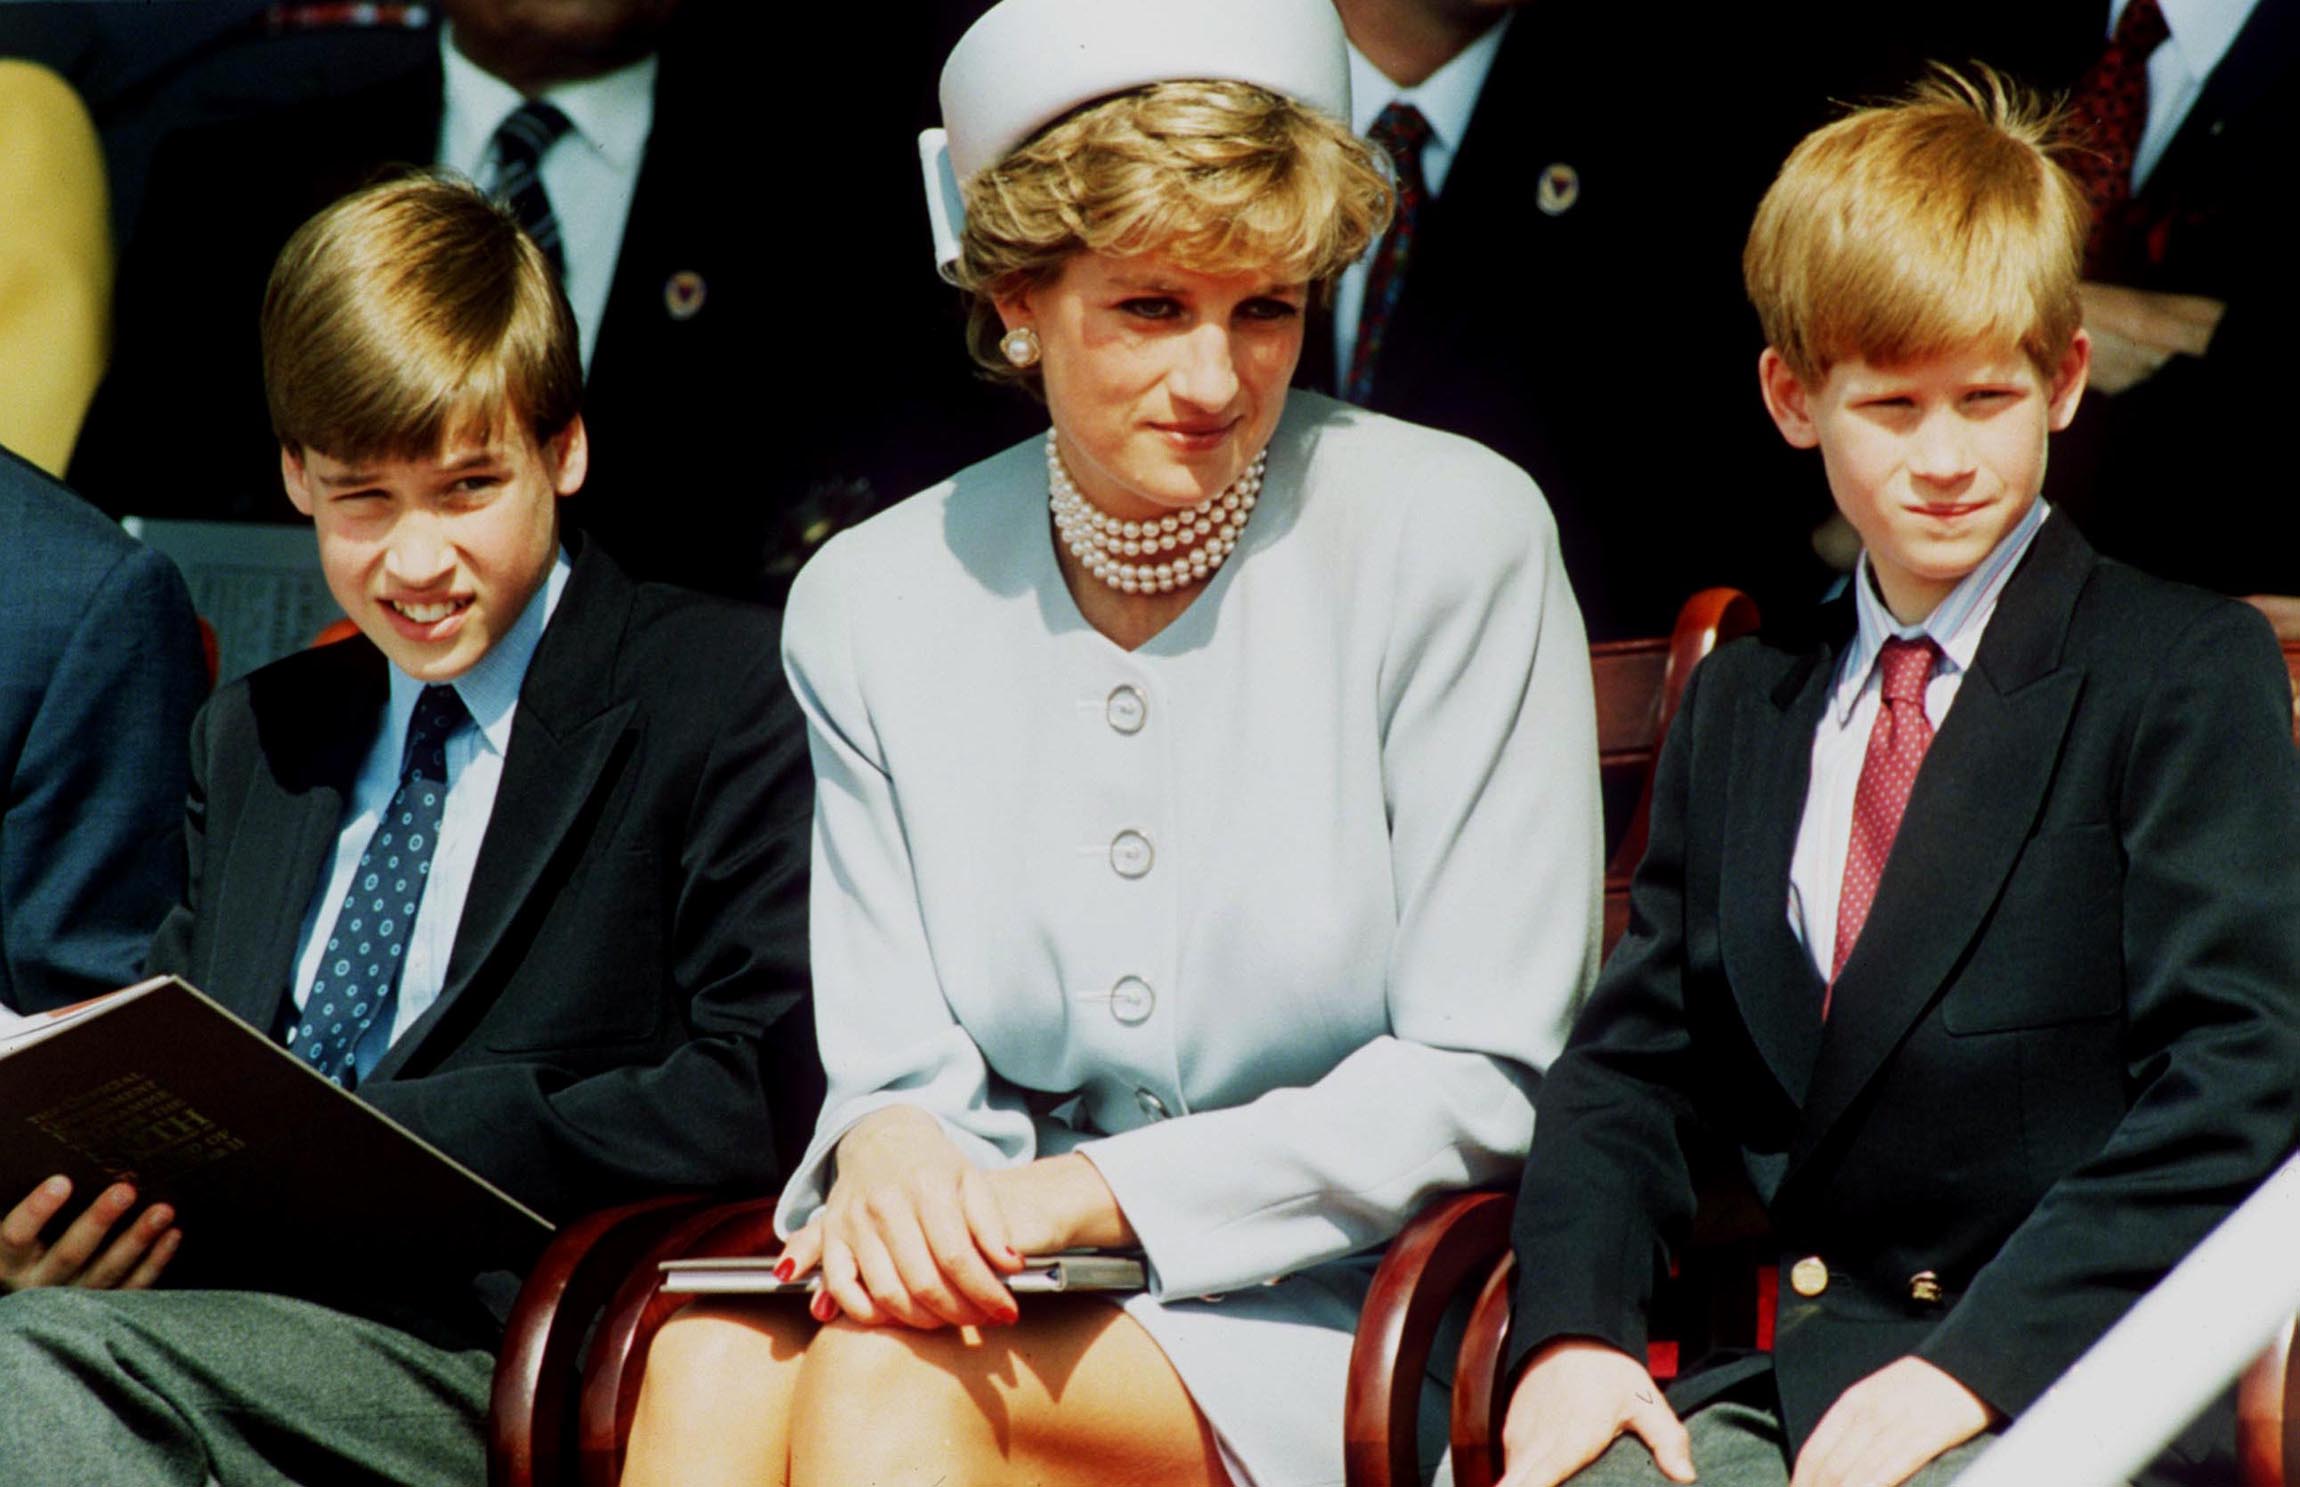 Princess Diana pictured with her sons Prince William and Prince Harry attending the Heads of State VE Remembrance Service in Hyde Park on May 7, 1995 in London, England. | Source: Getty Images